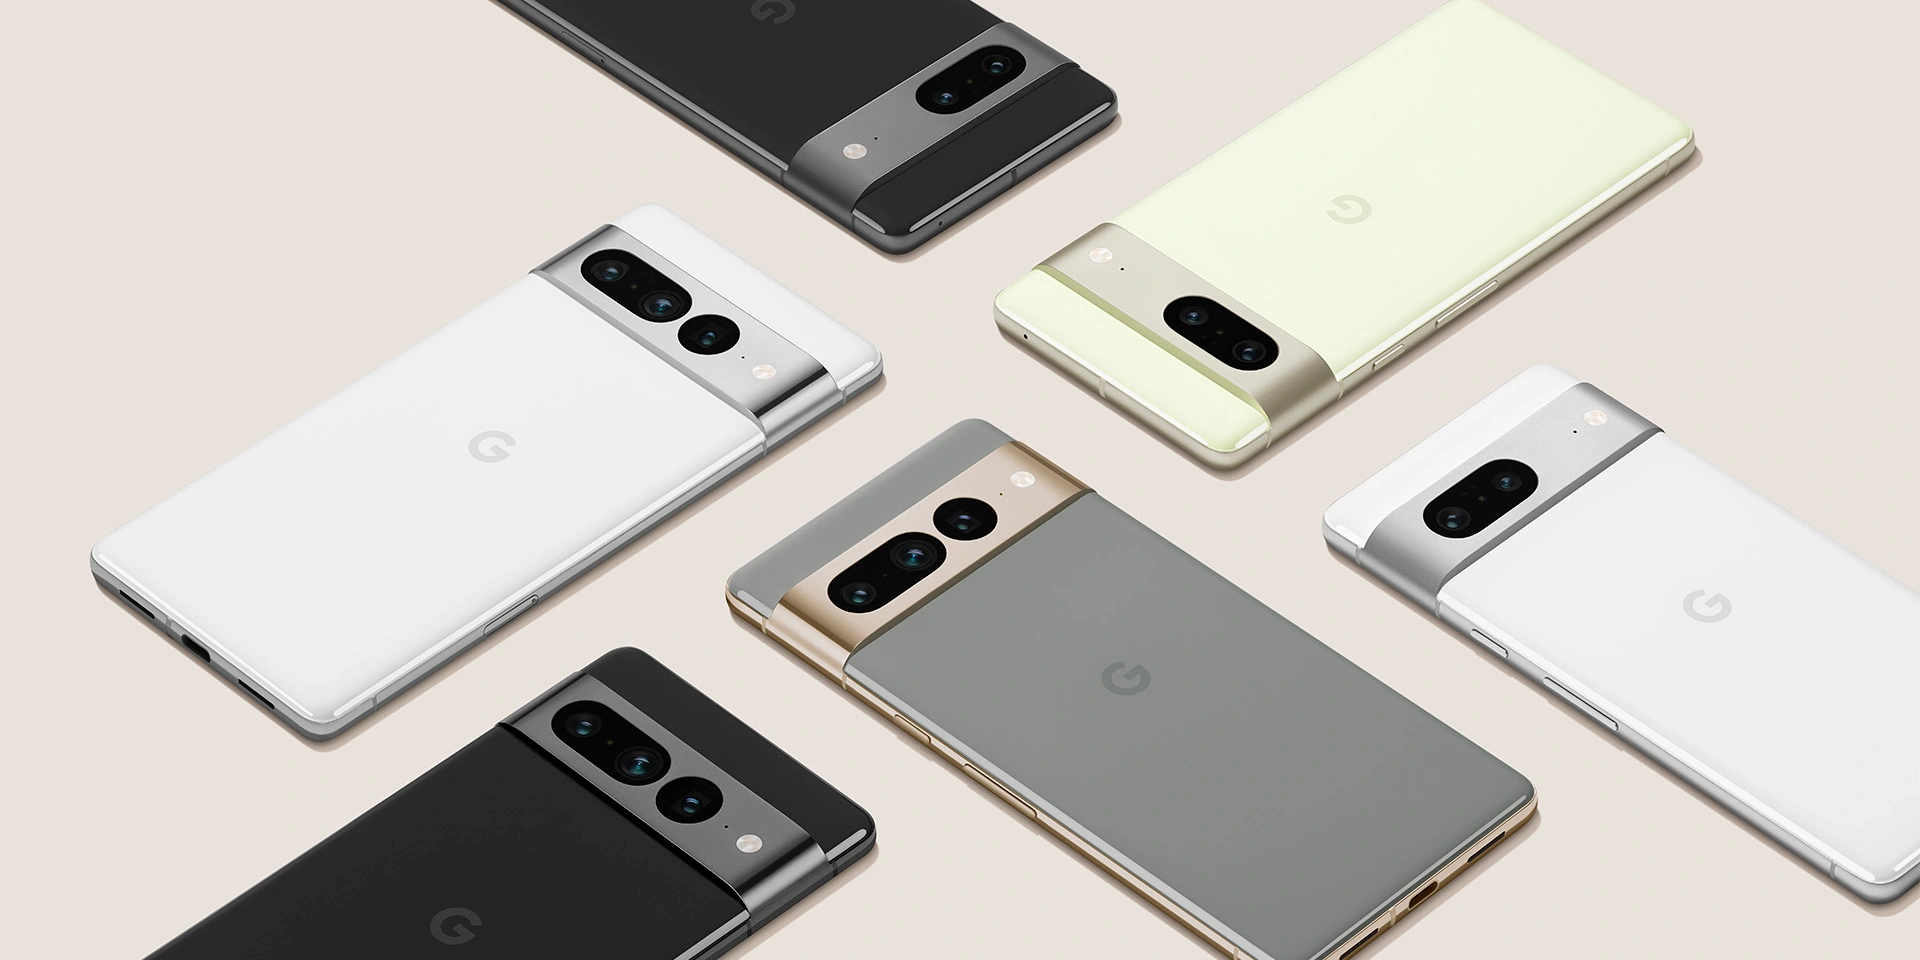 An alleged Pixel 7 prototype will appear on eBay a few months before the official release, the starting price was $450